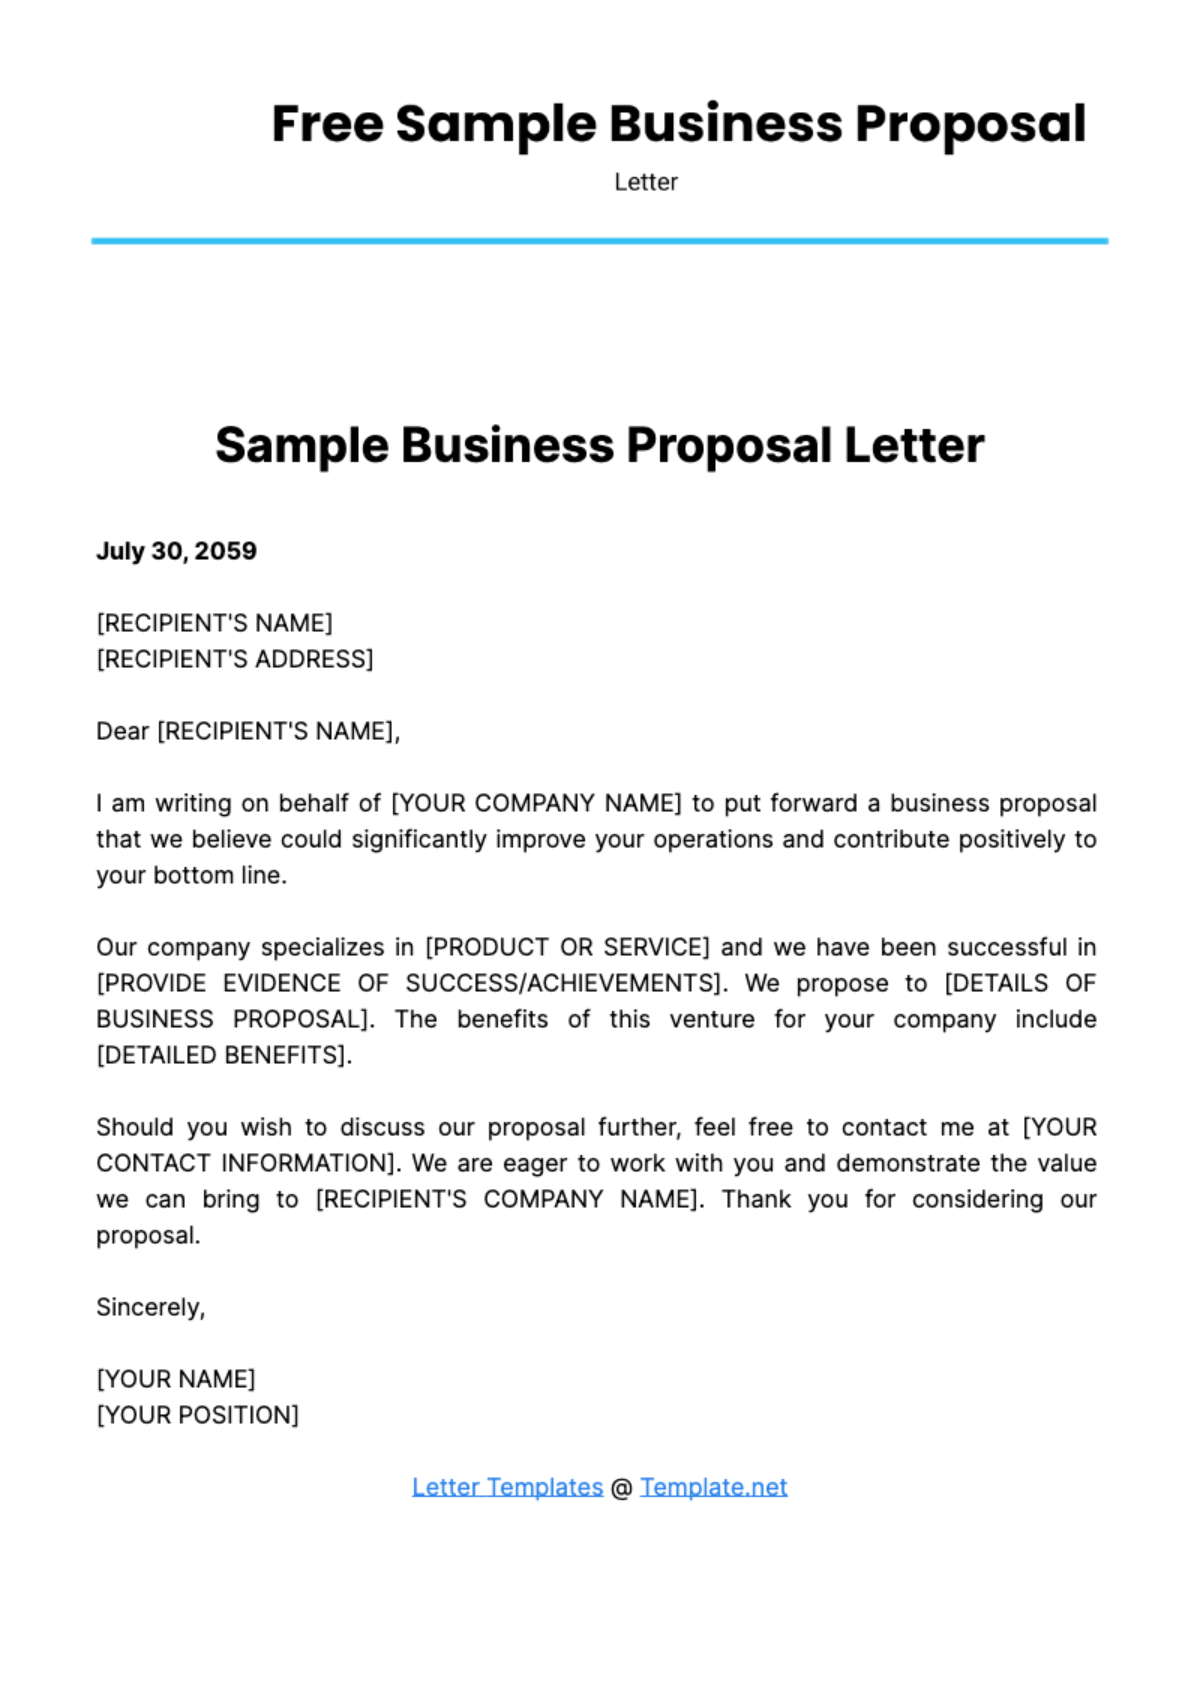 Free Sample Business Proposal Letter Template